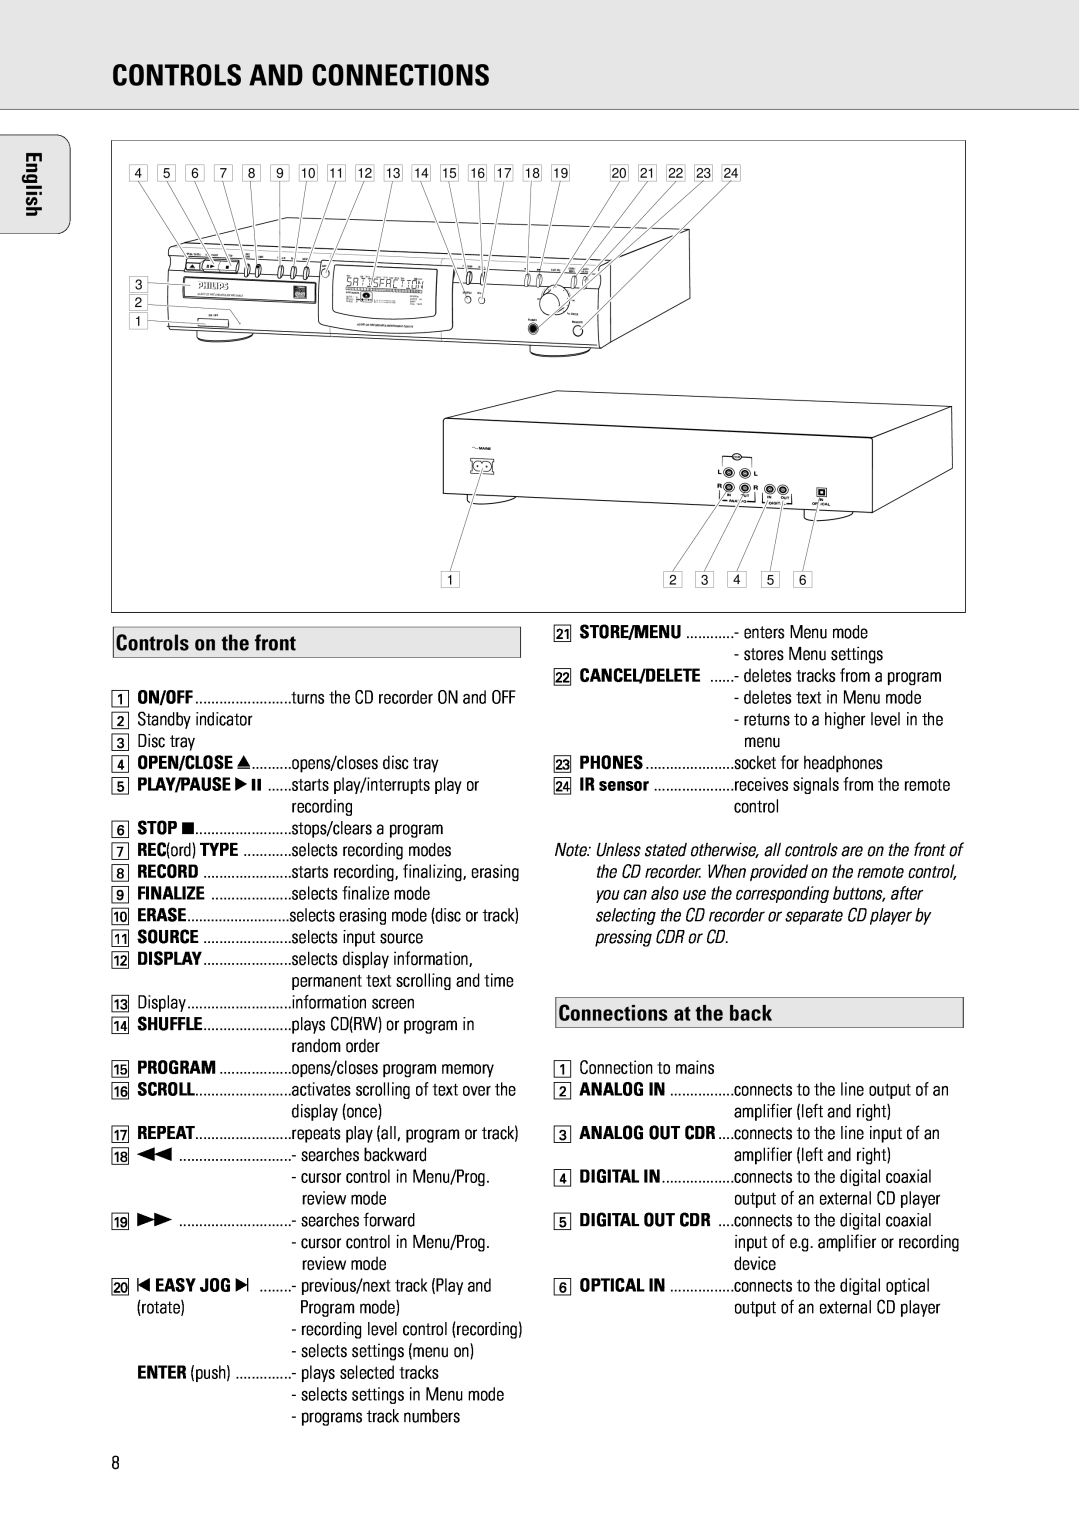 Philips CDR770/771 Controls And Connections, Controls on the front, Connections at the back, English, Program, Analog In 